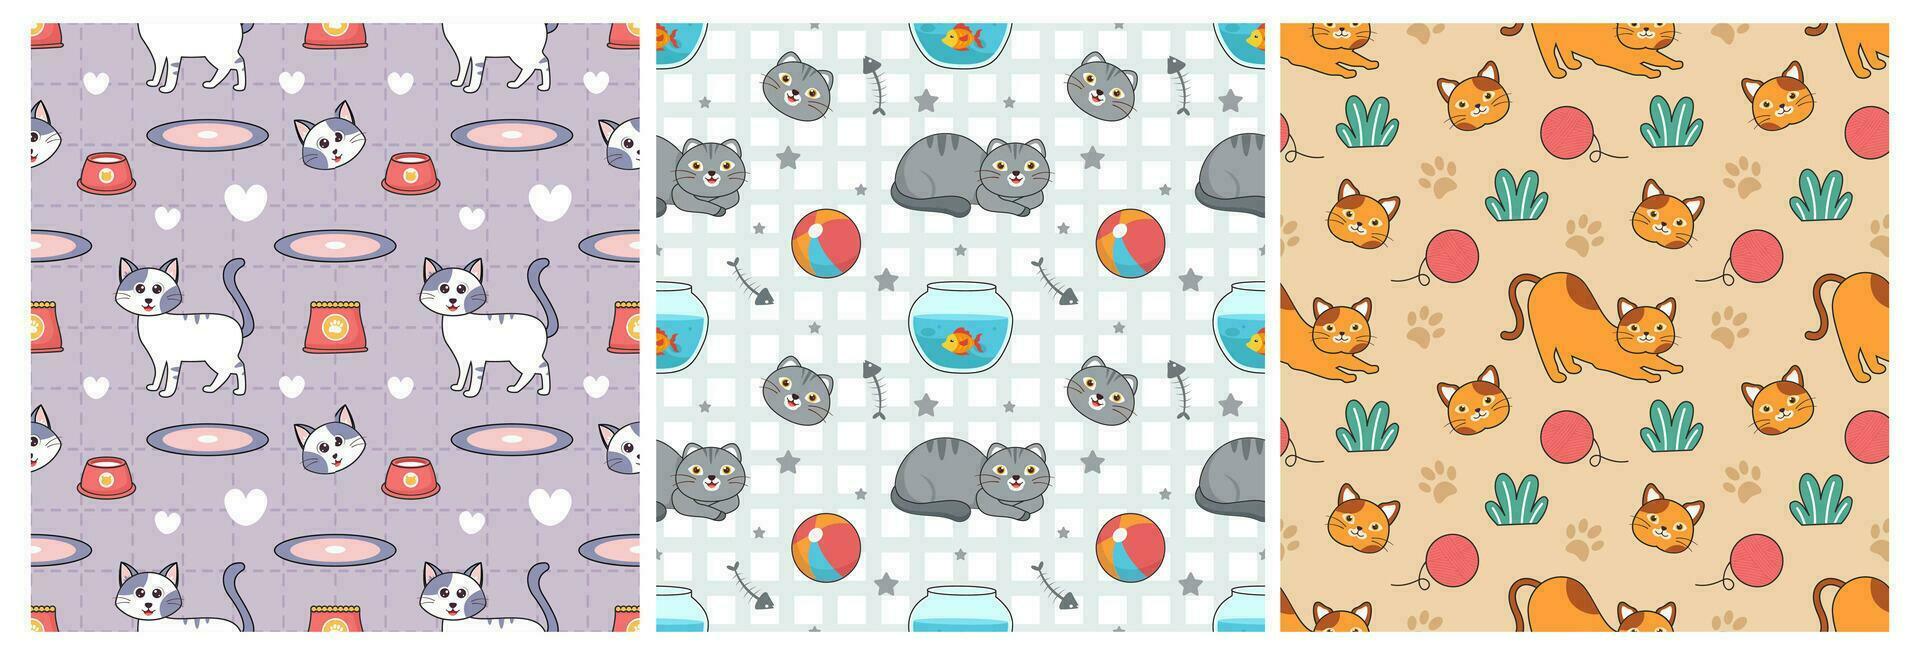 Set of Cats Animals Seamless Pattern Design with Cat Element in Template Hand Drawn Cartoon Flat Illustration vector